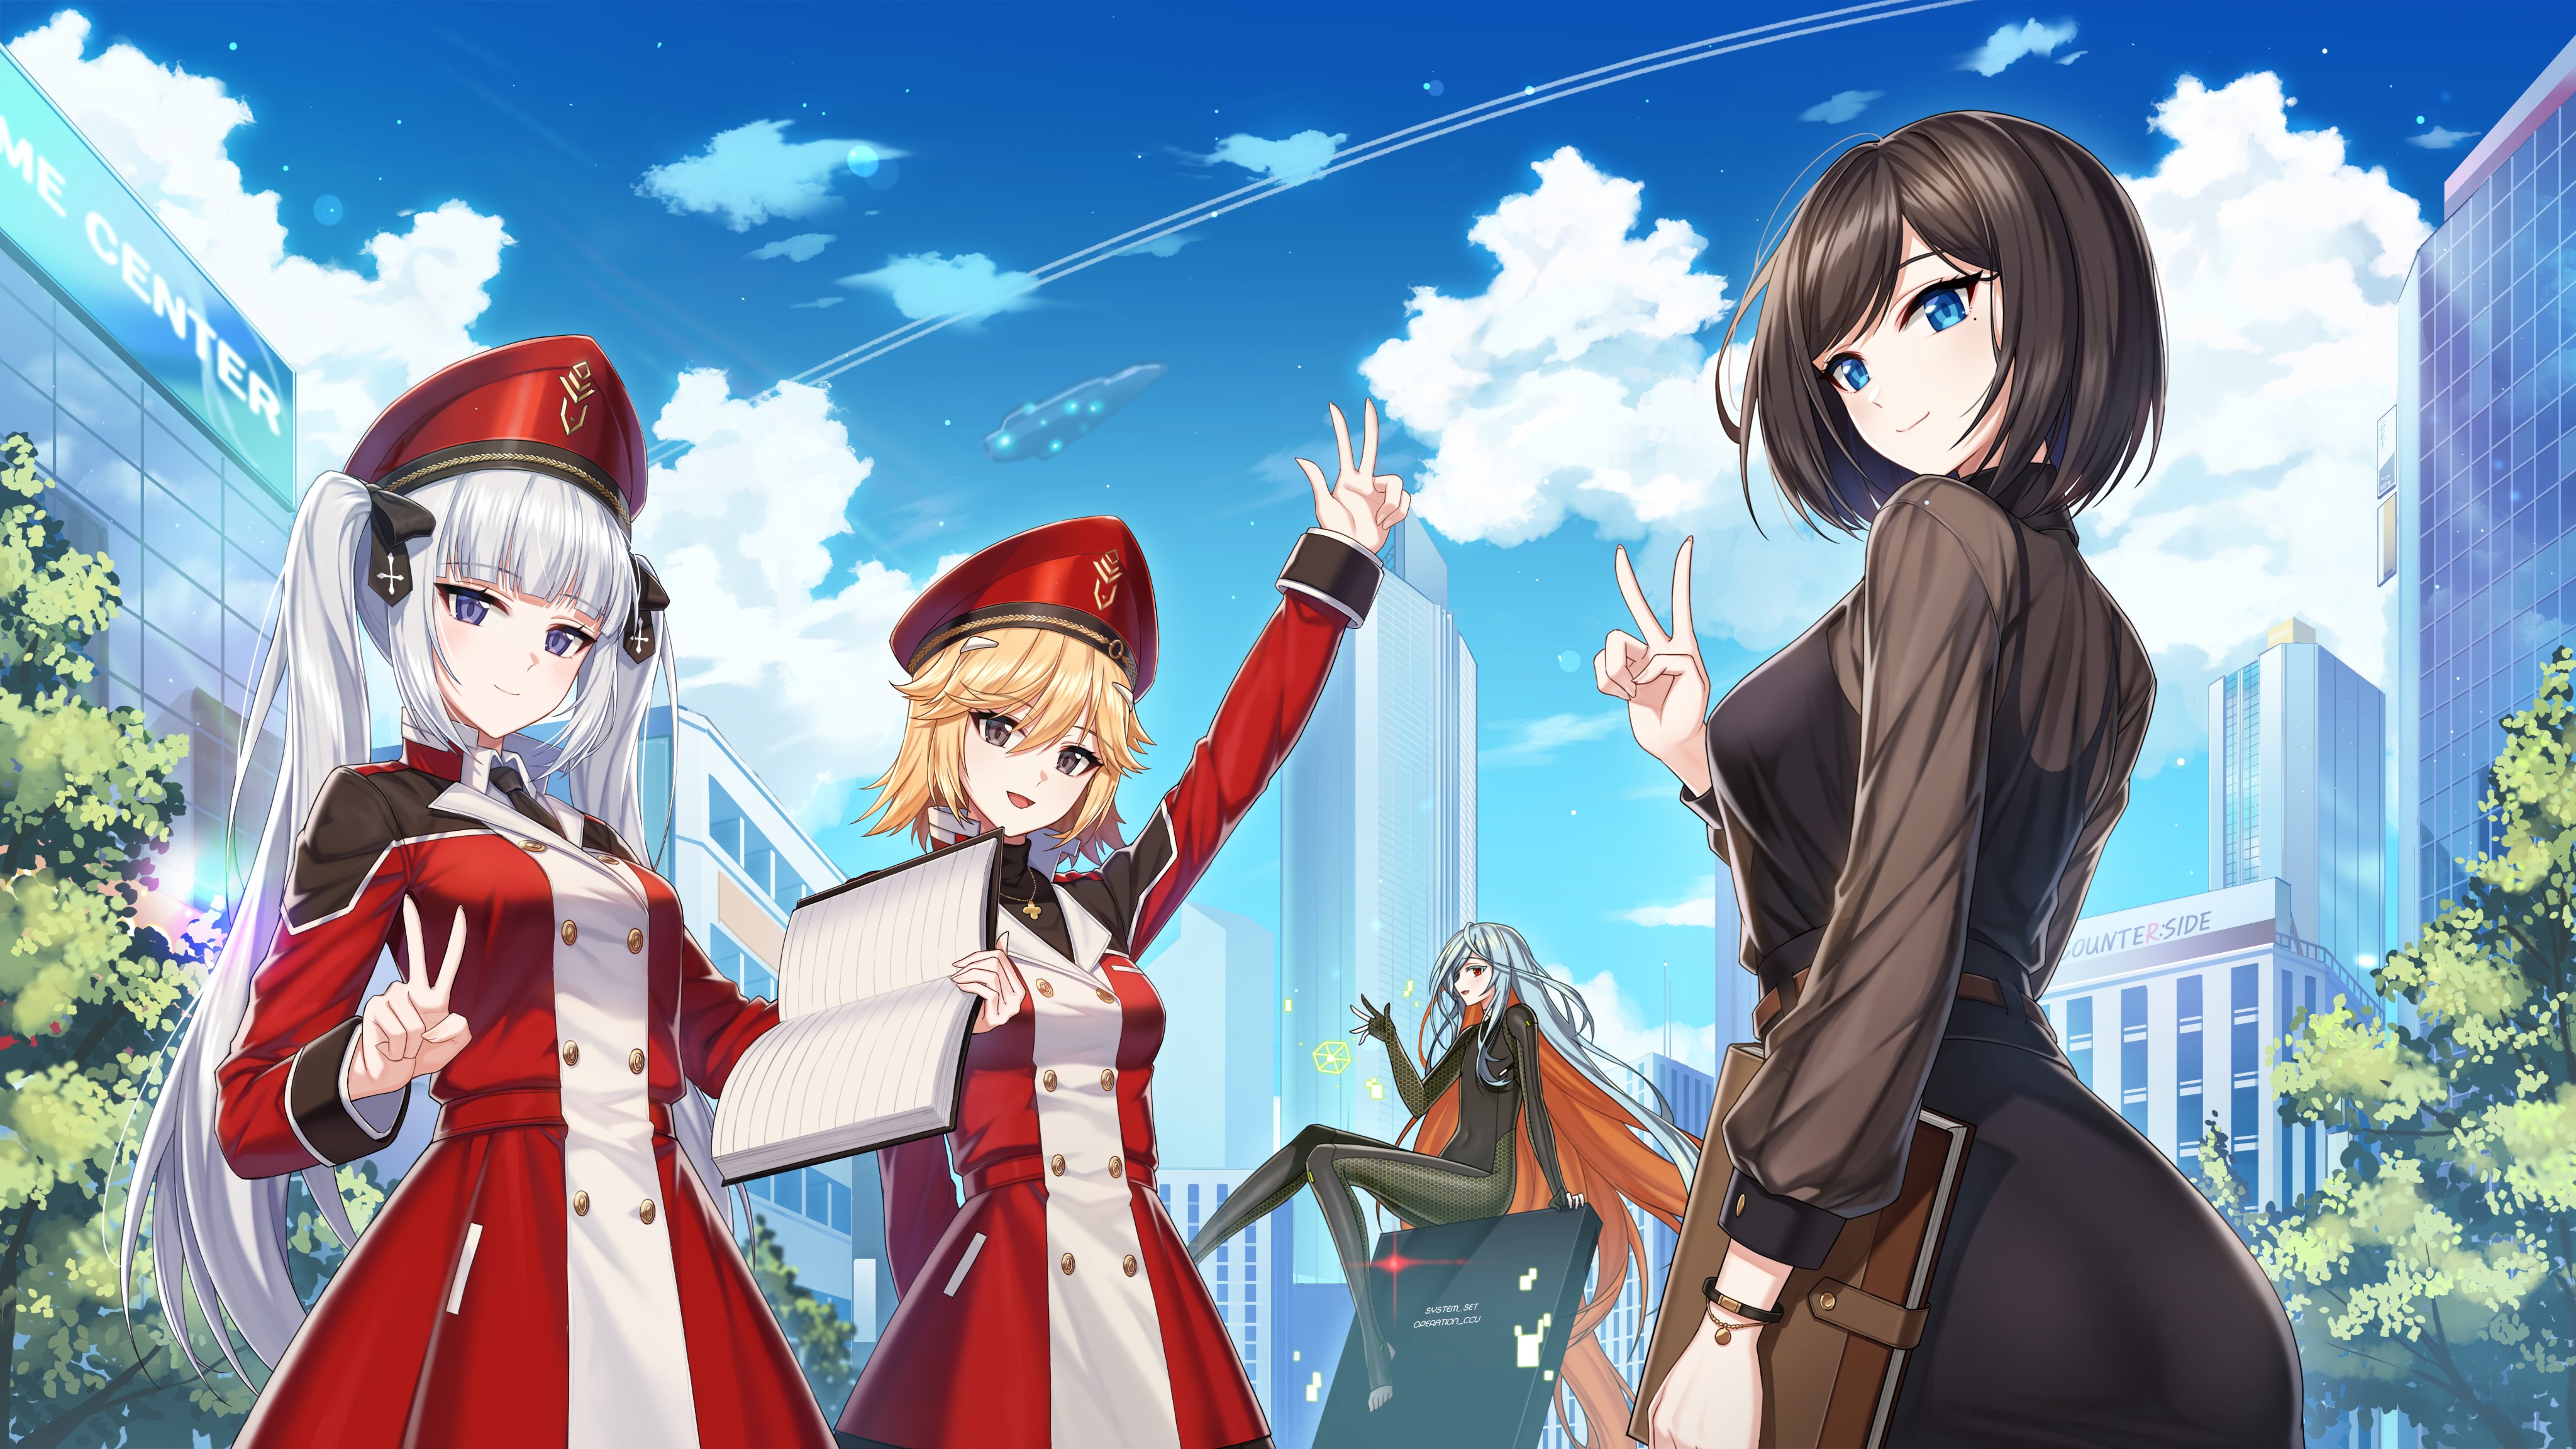 Anime 4096x2304 anime anime girls arms up victory sign hand gesture hat blue eyes brunette group of women women quartet